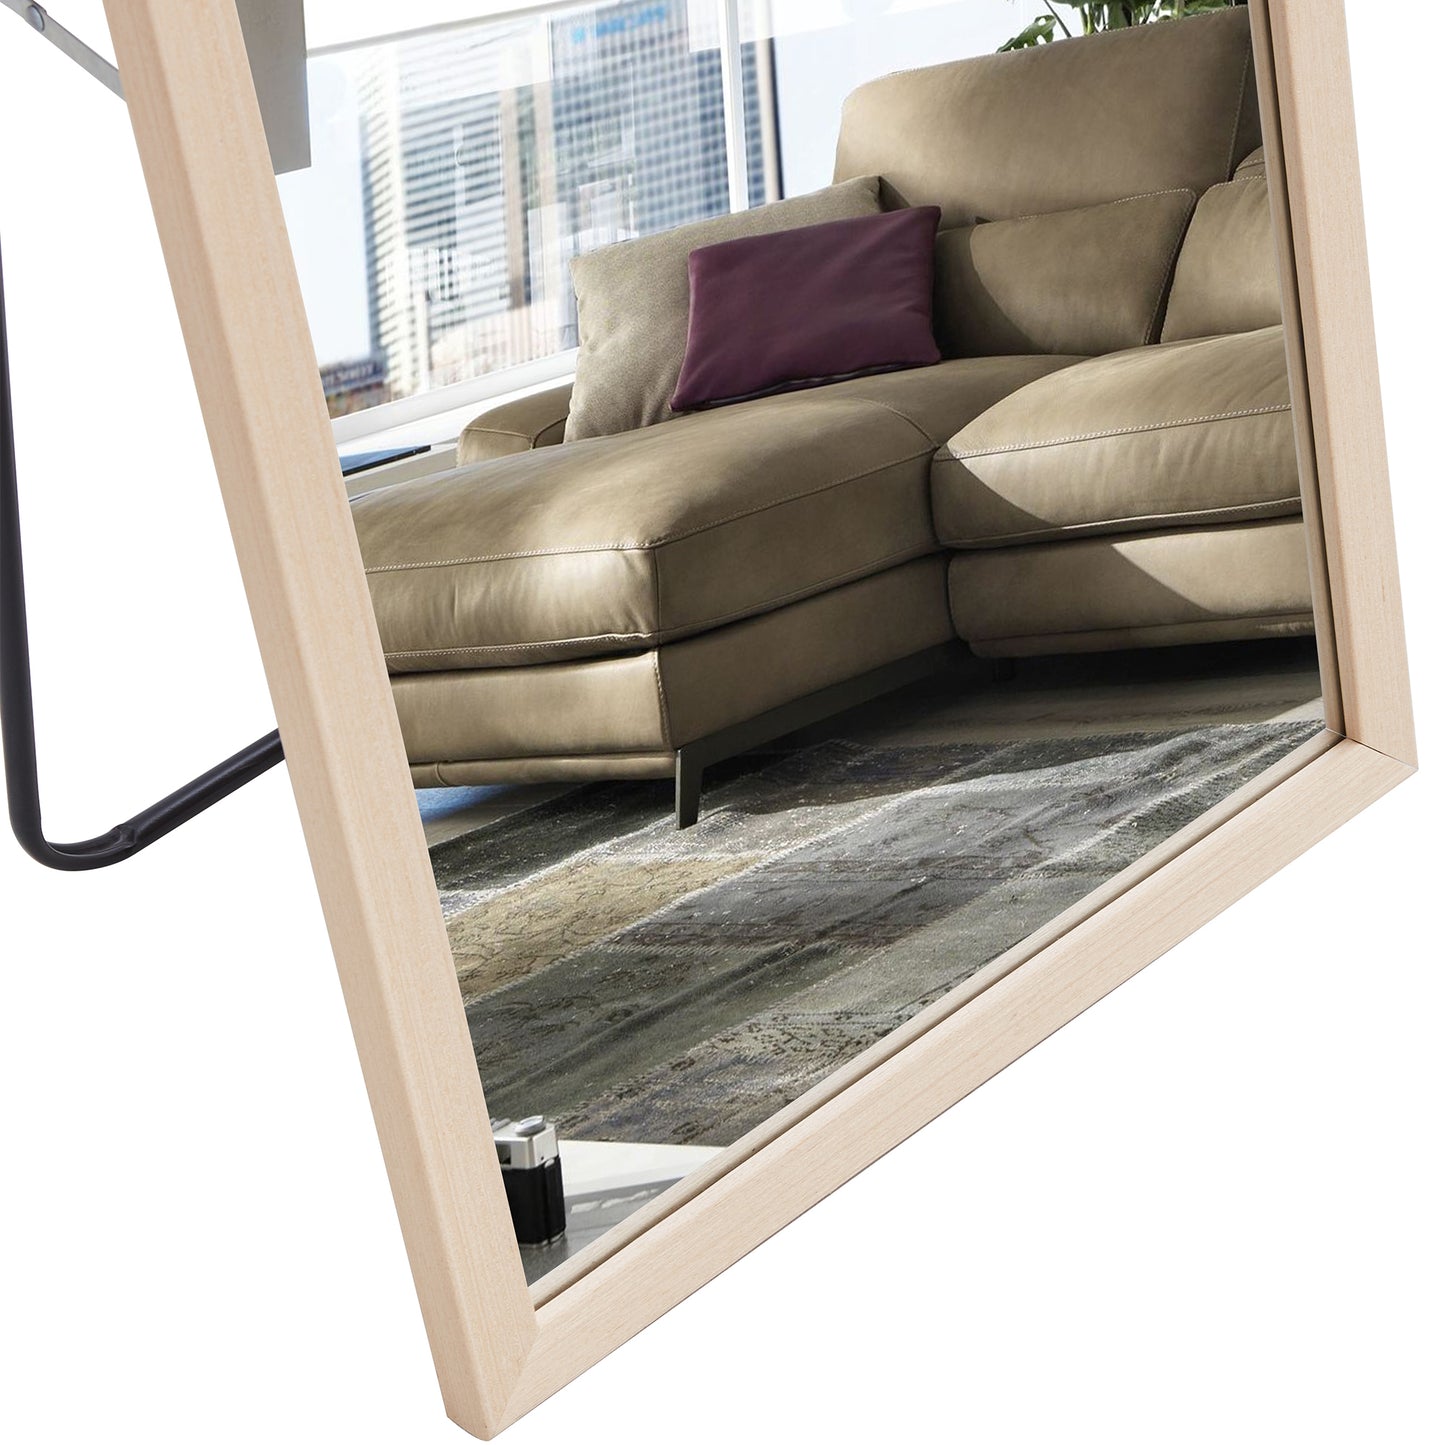 Third generation packaging upgrade, thickened border,  full length mirror, dressing mirror, bedroom entrance, decorative mirror, clothing store, mirror. 57.9"*18.1"